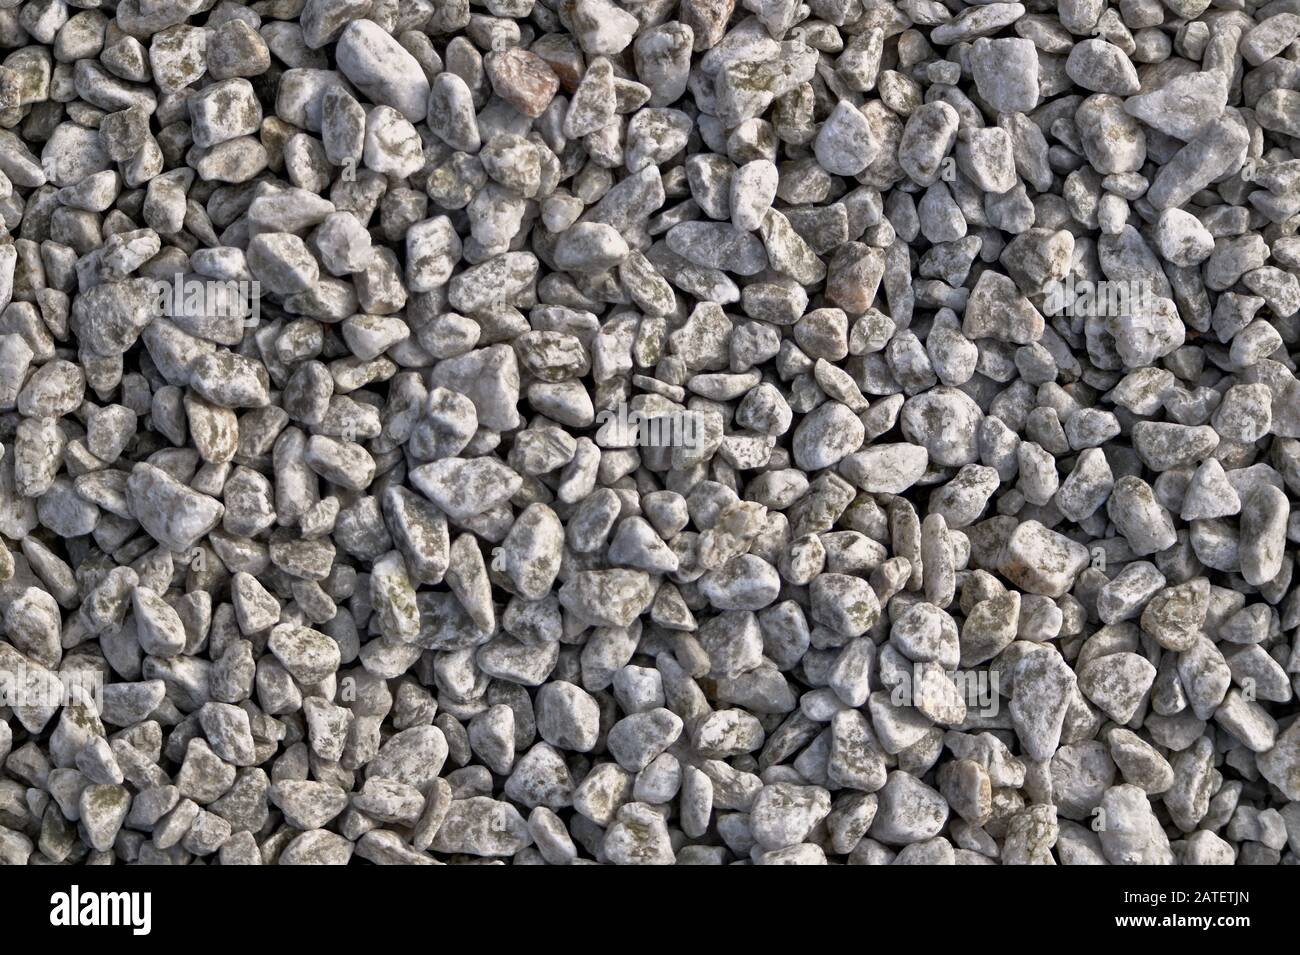 The background of gray stone rubble is a dropout in daylight. Stock Photo